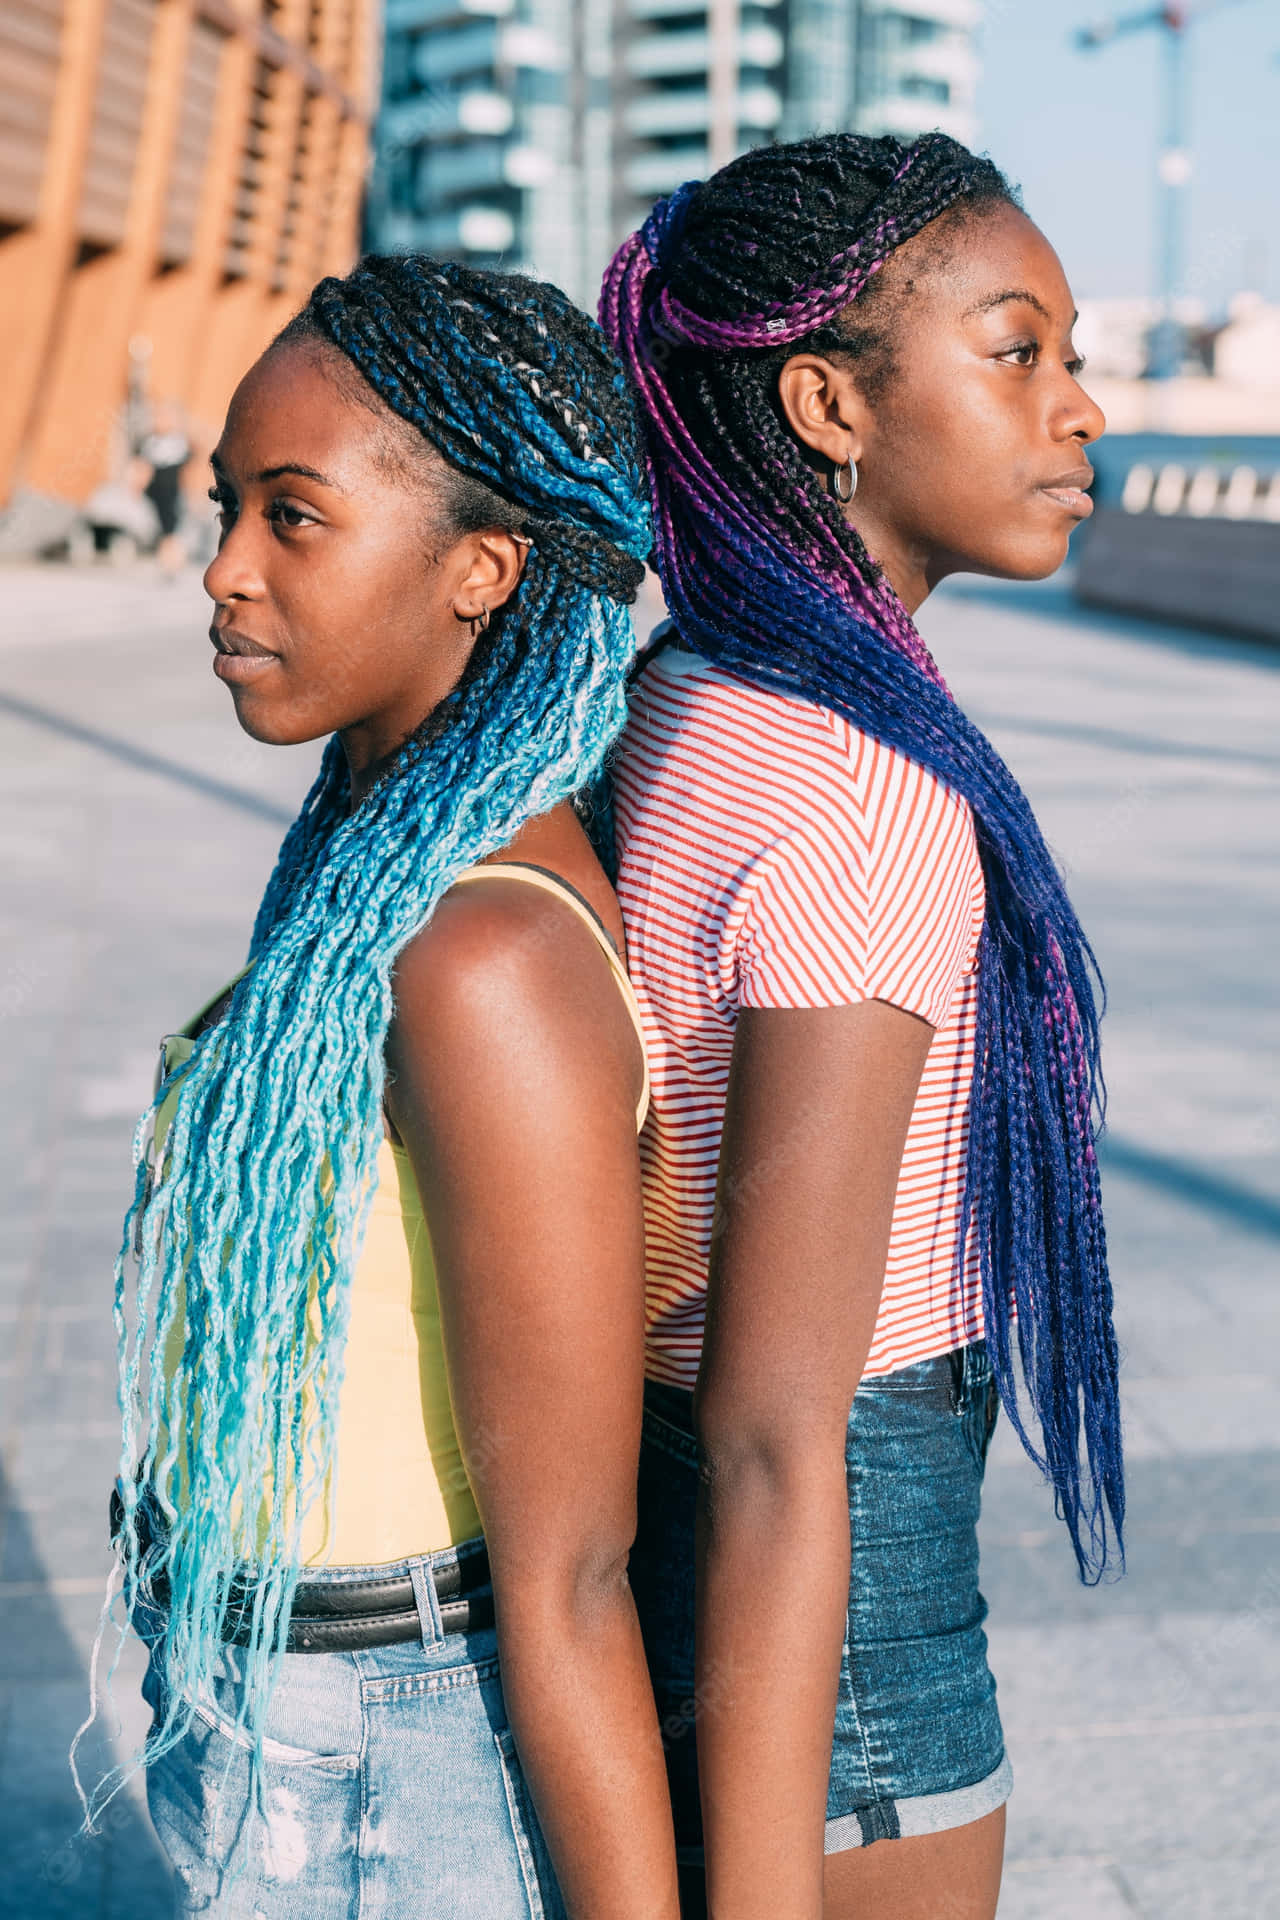 Two Women With Colorful Braids Standing Next To Each Other